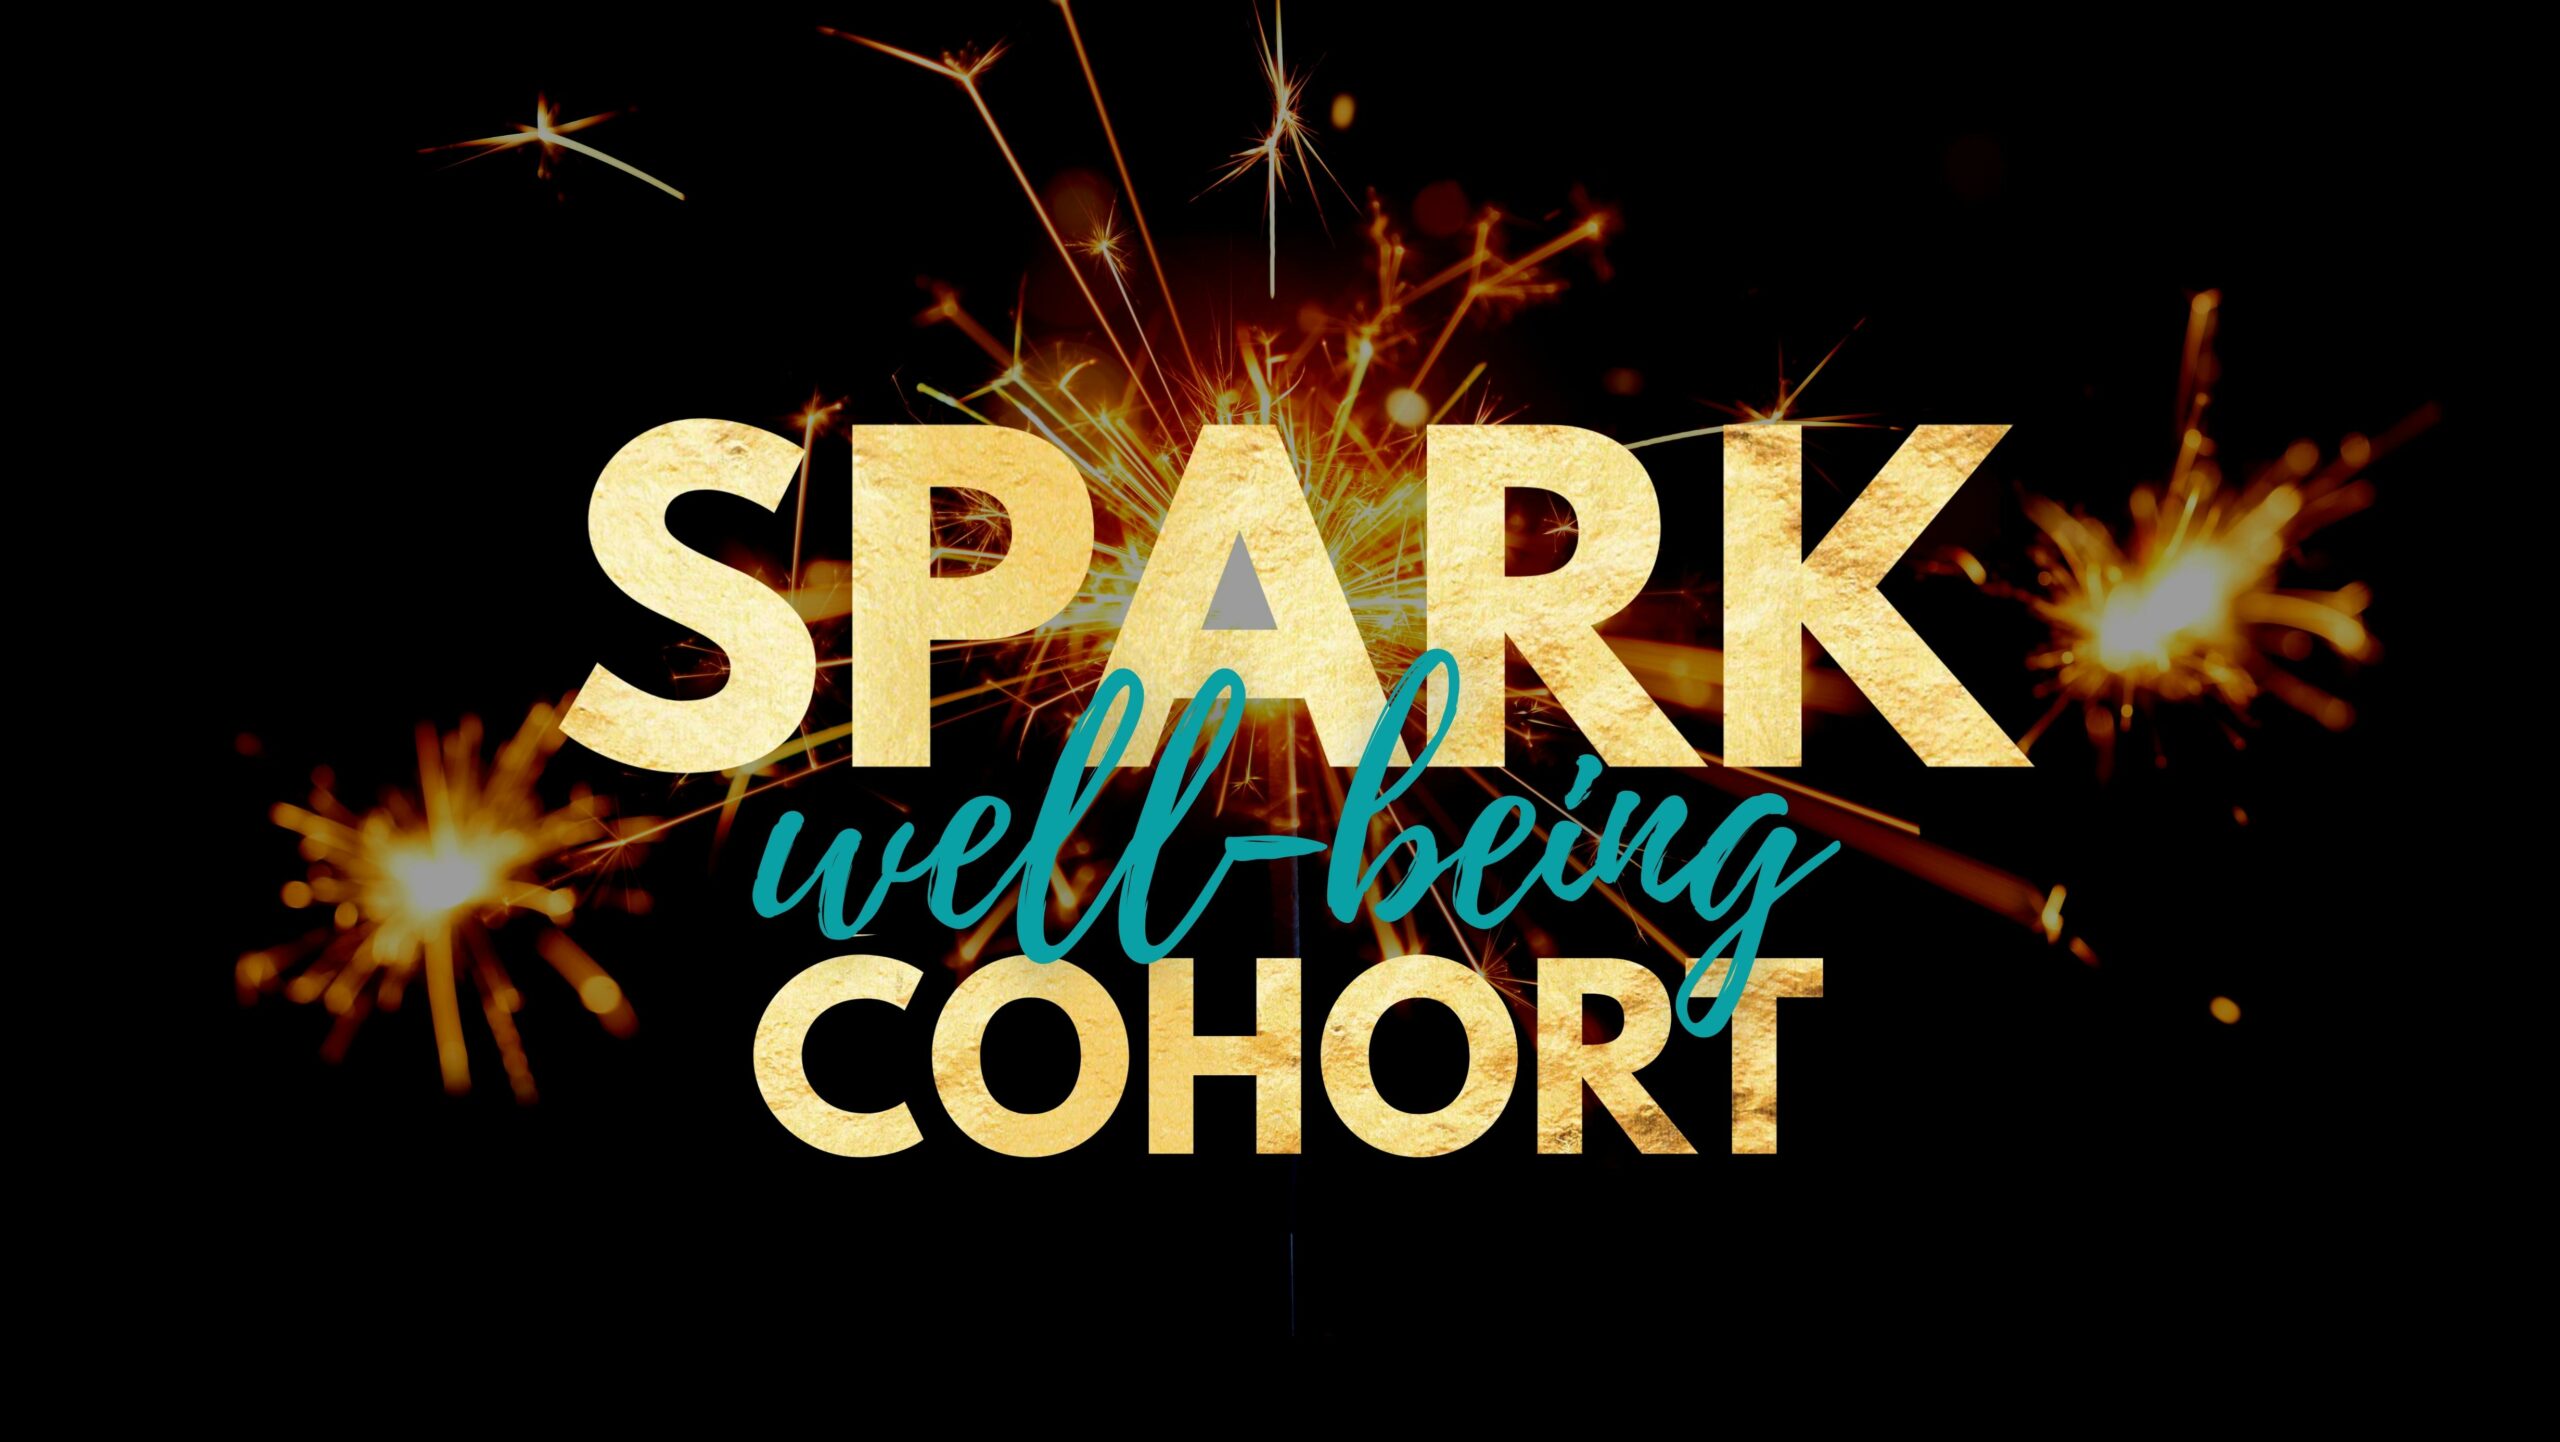 SPARK Well-being Cohort. Background is black with pictures of sparks.